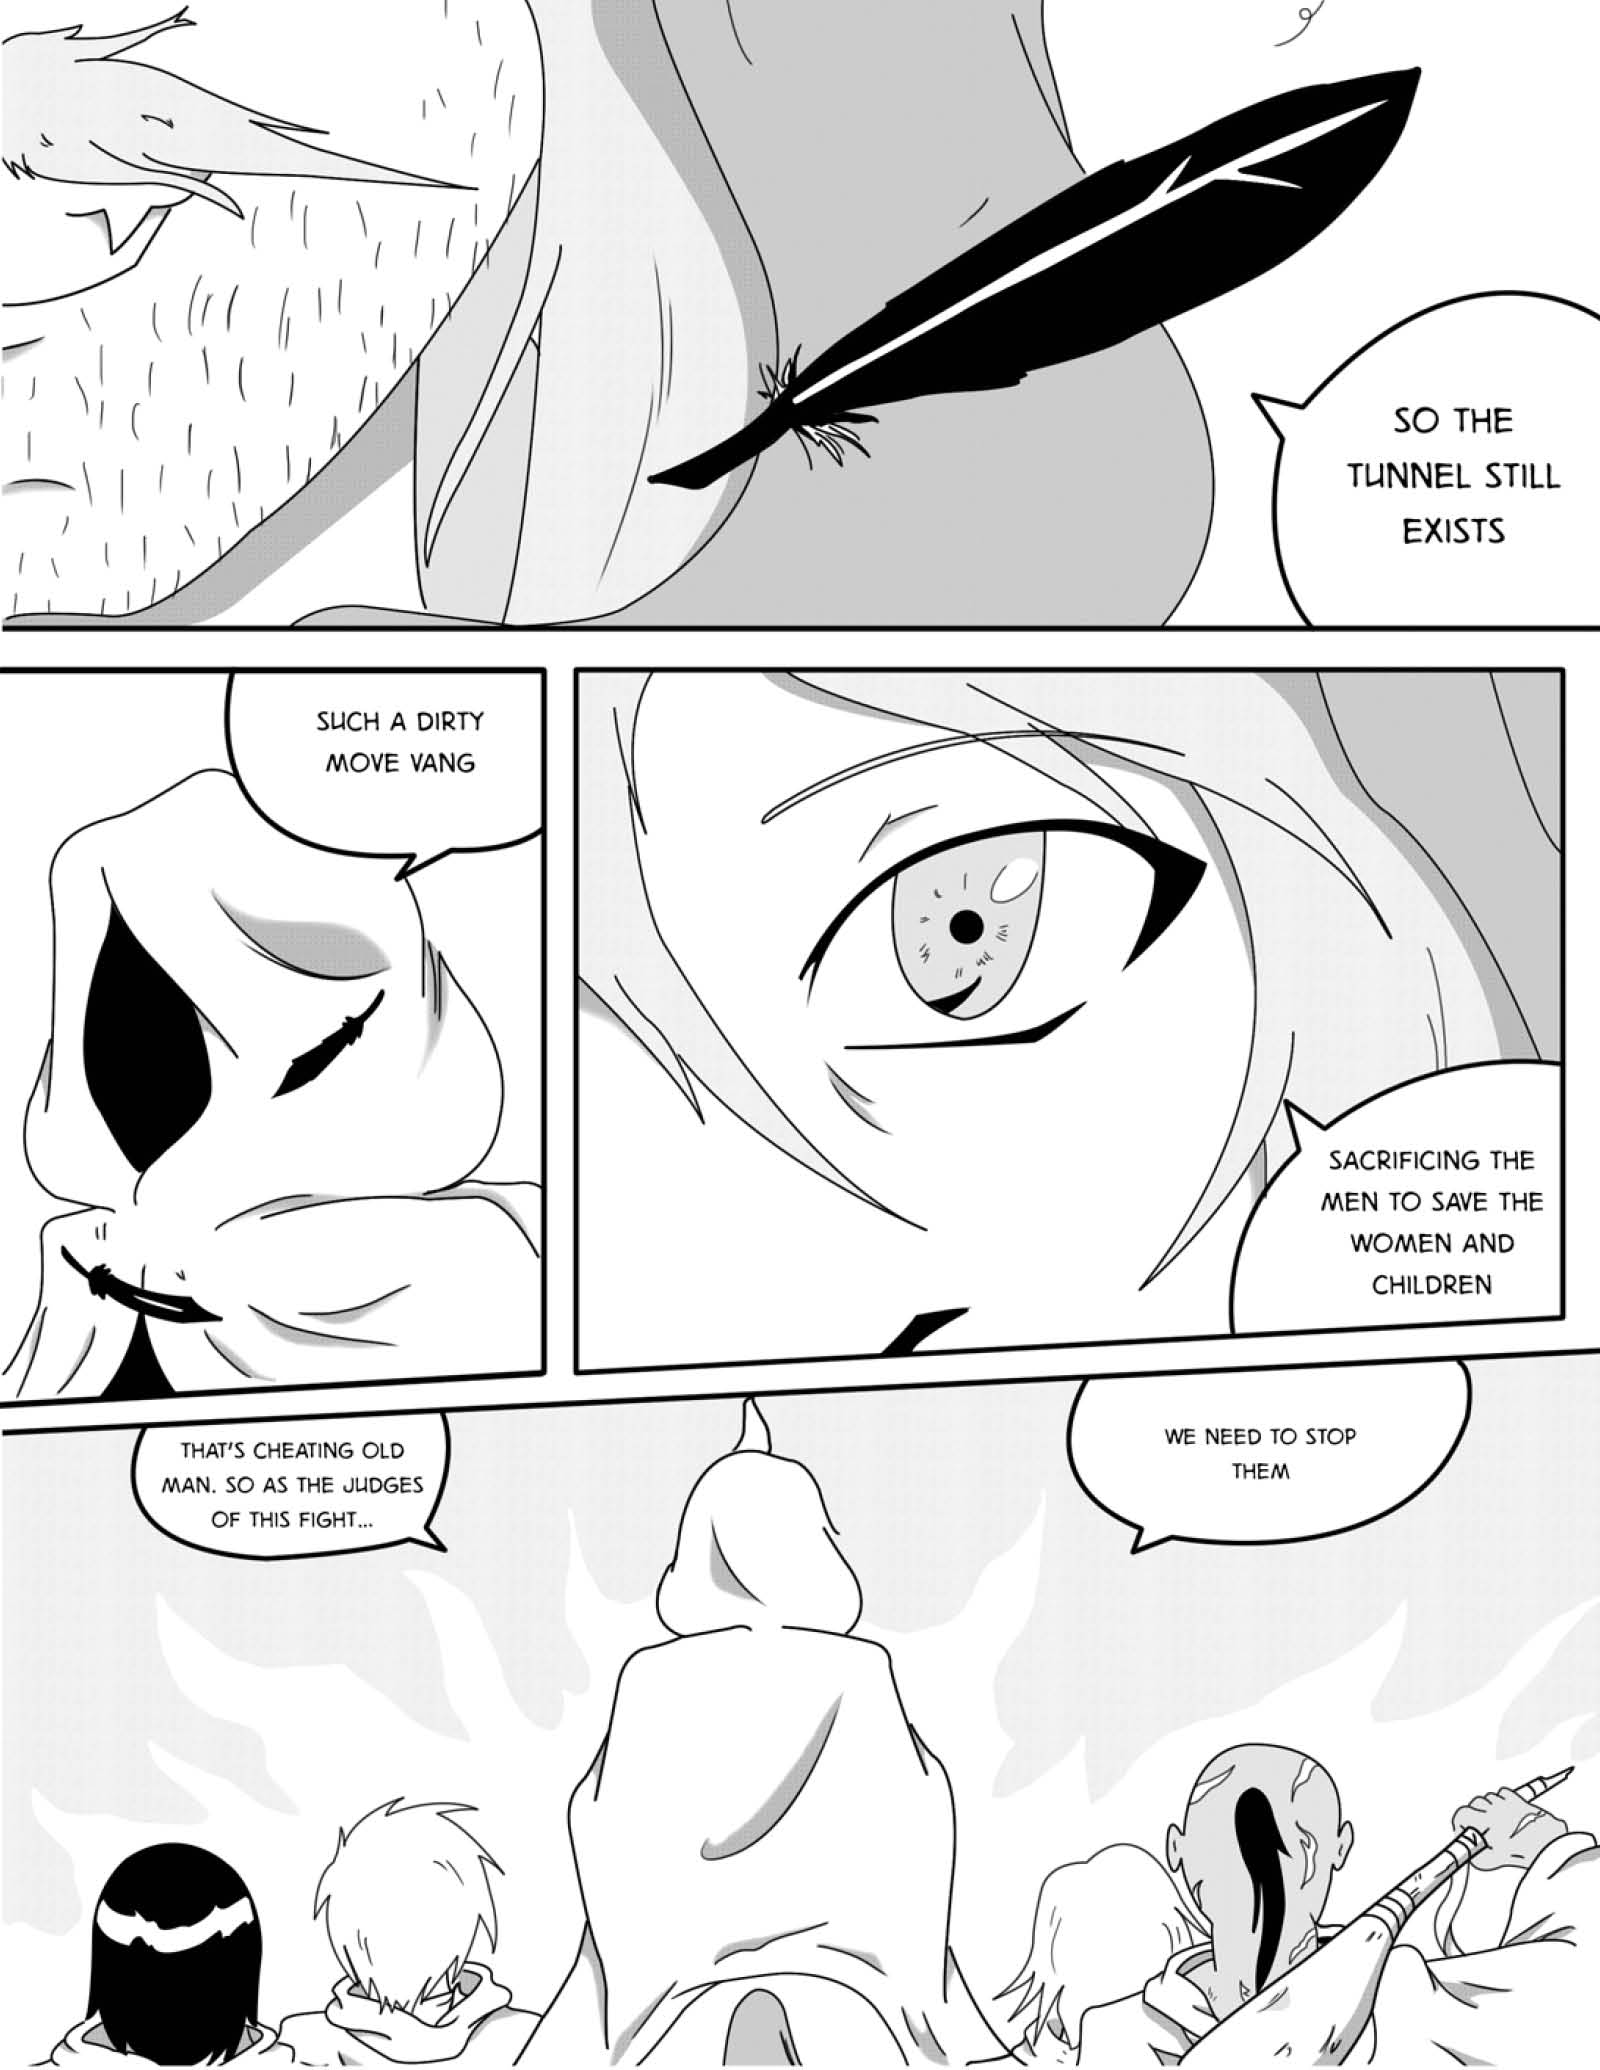 Series Dilan: the Chronicles of Covak - Chapter 1 - Page 46 - Language ENG